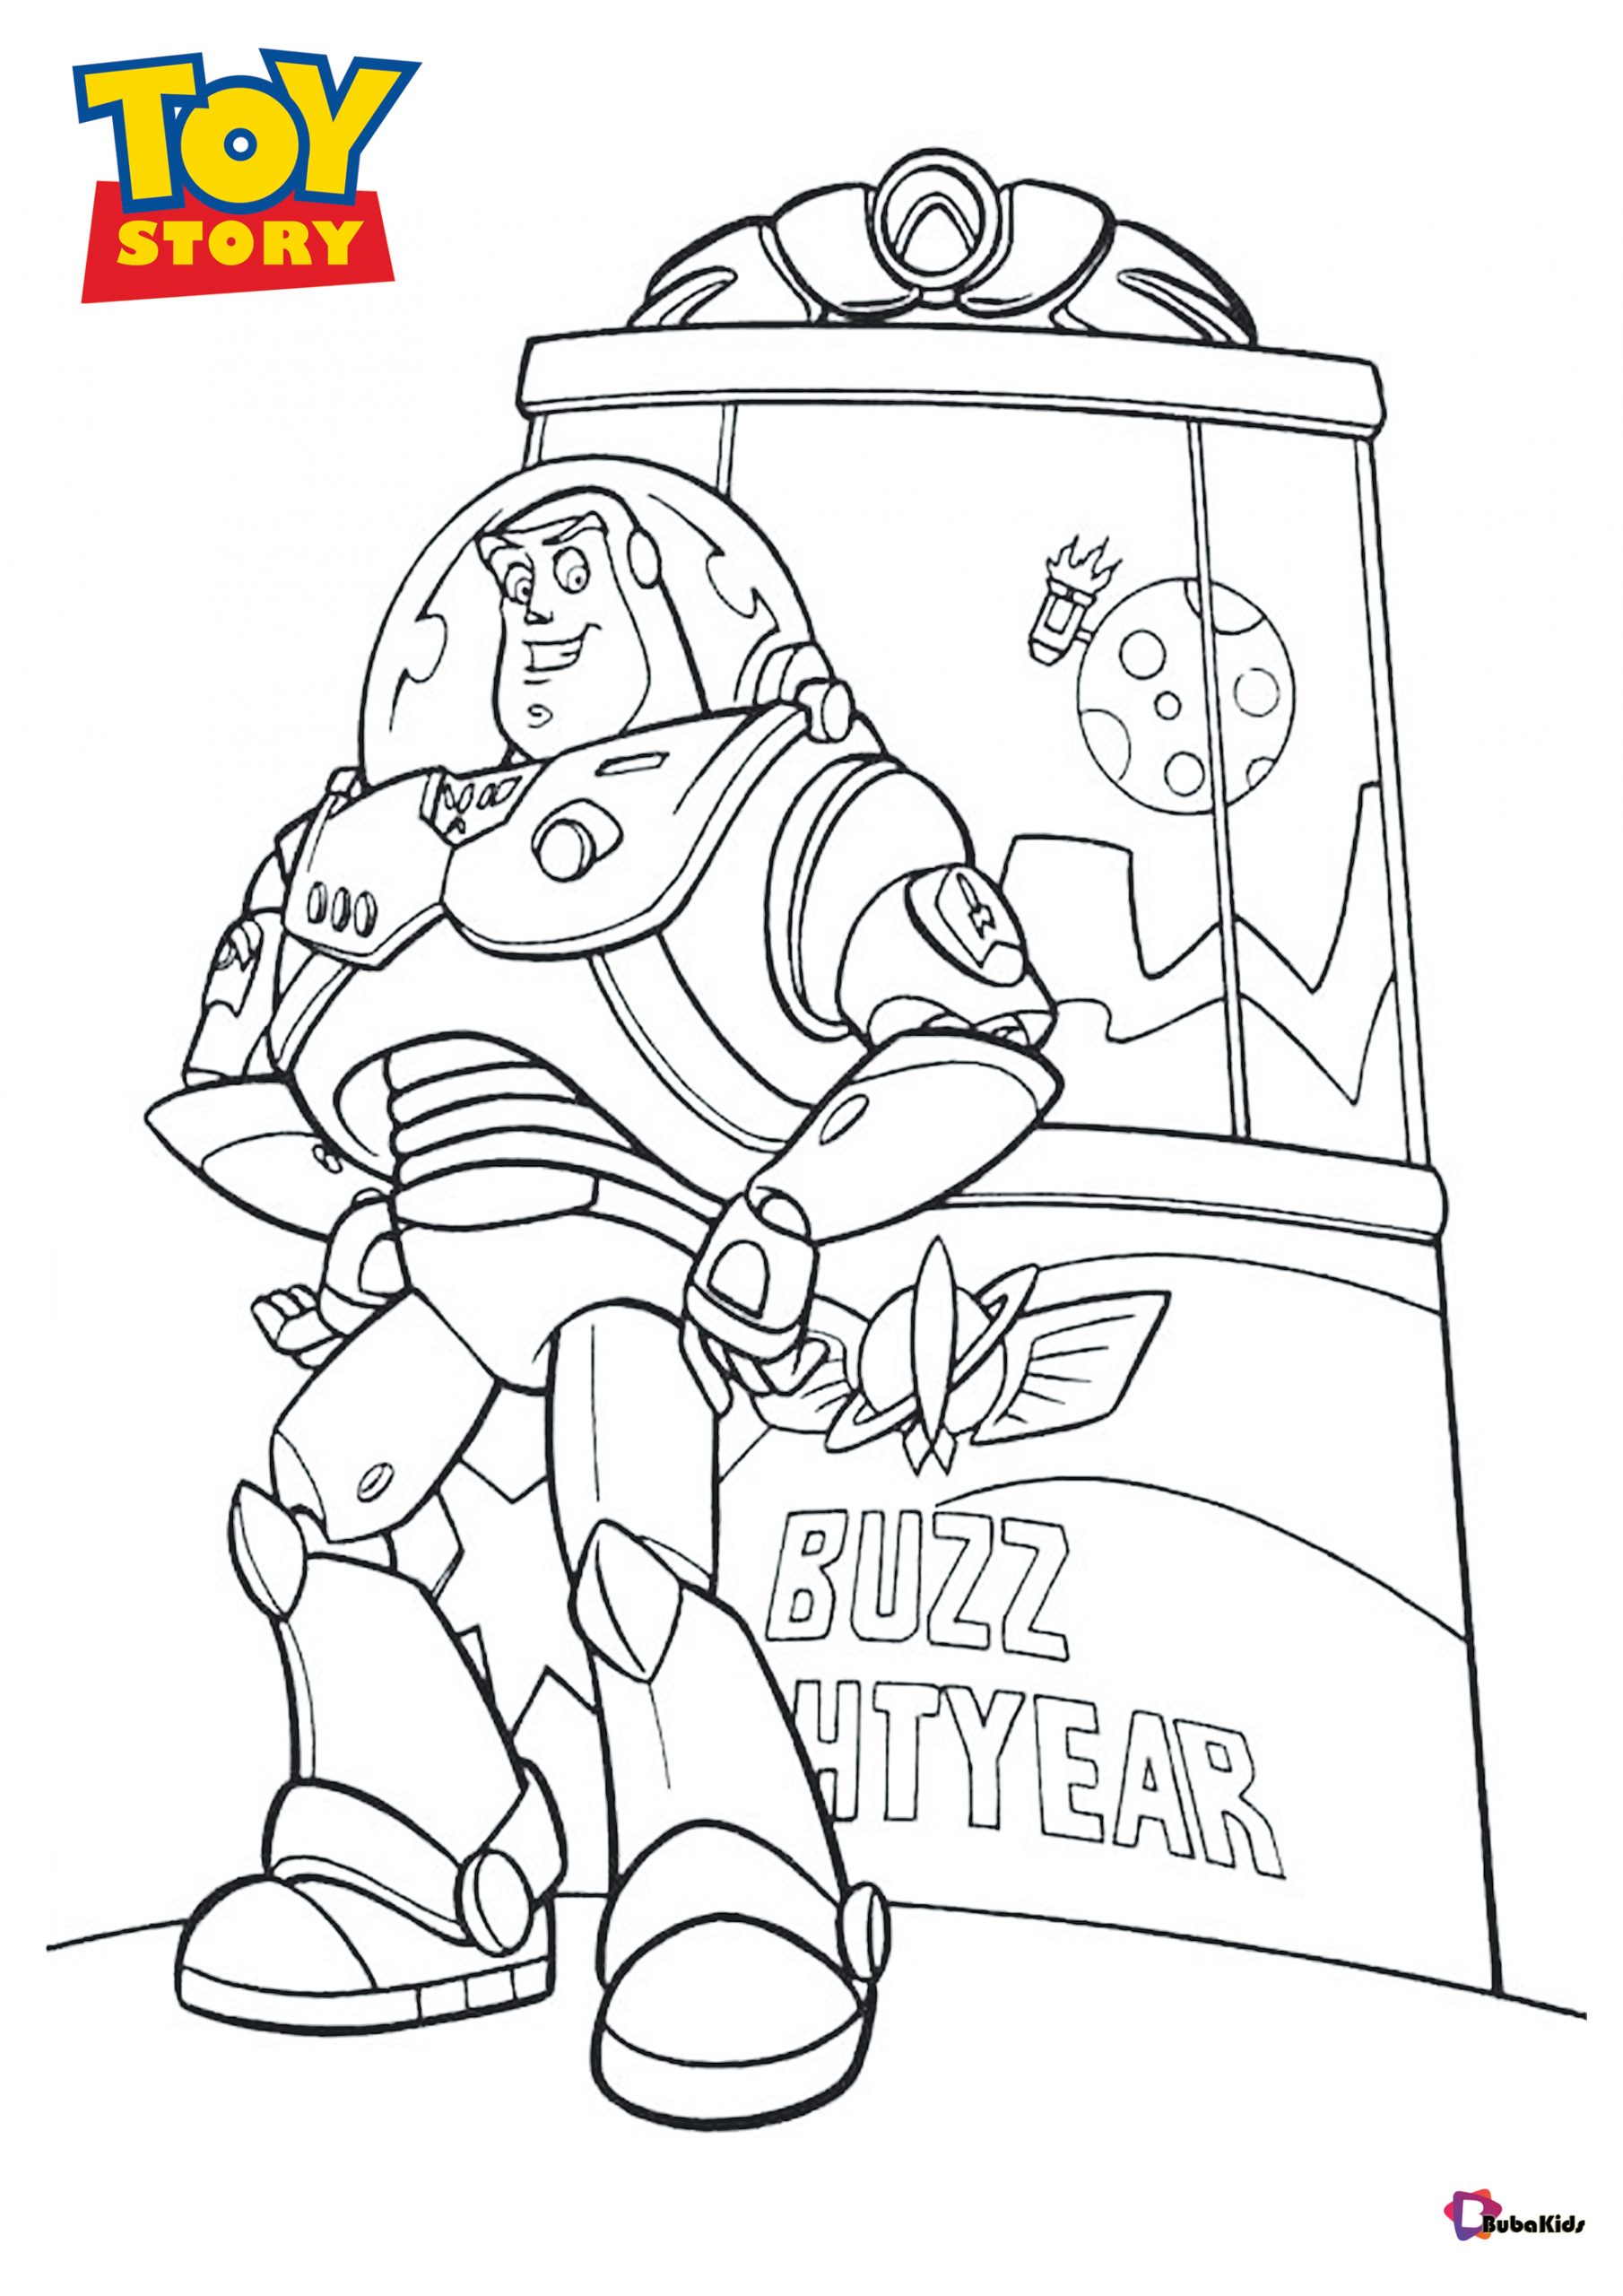 Printable Coloring pages of Buzz Lightyear Toy Story Character